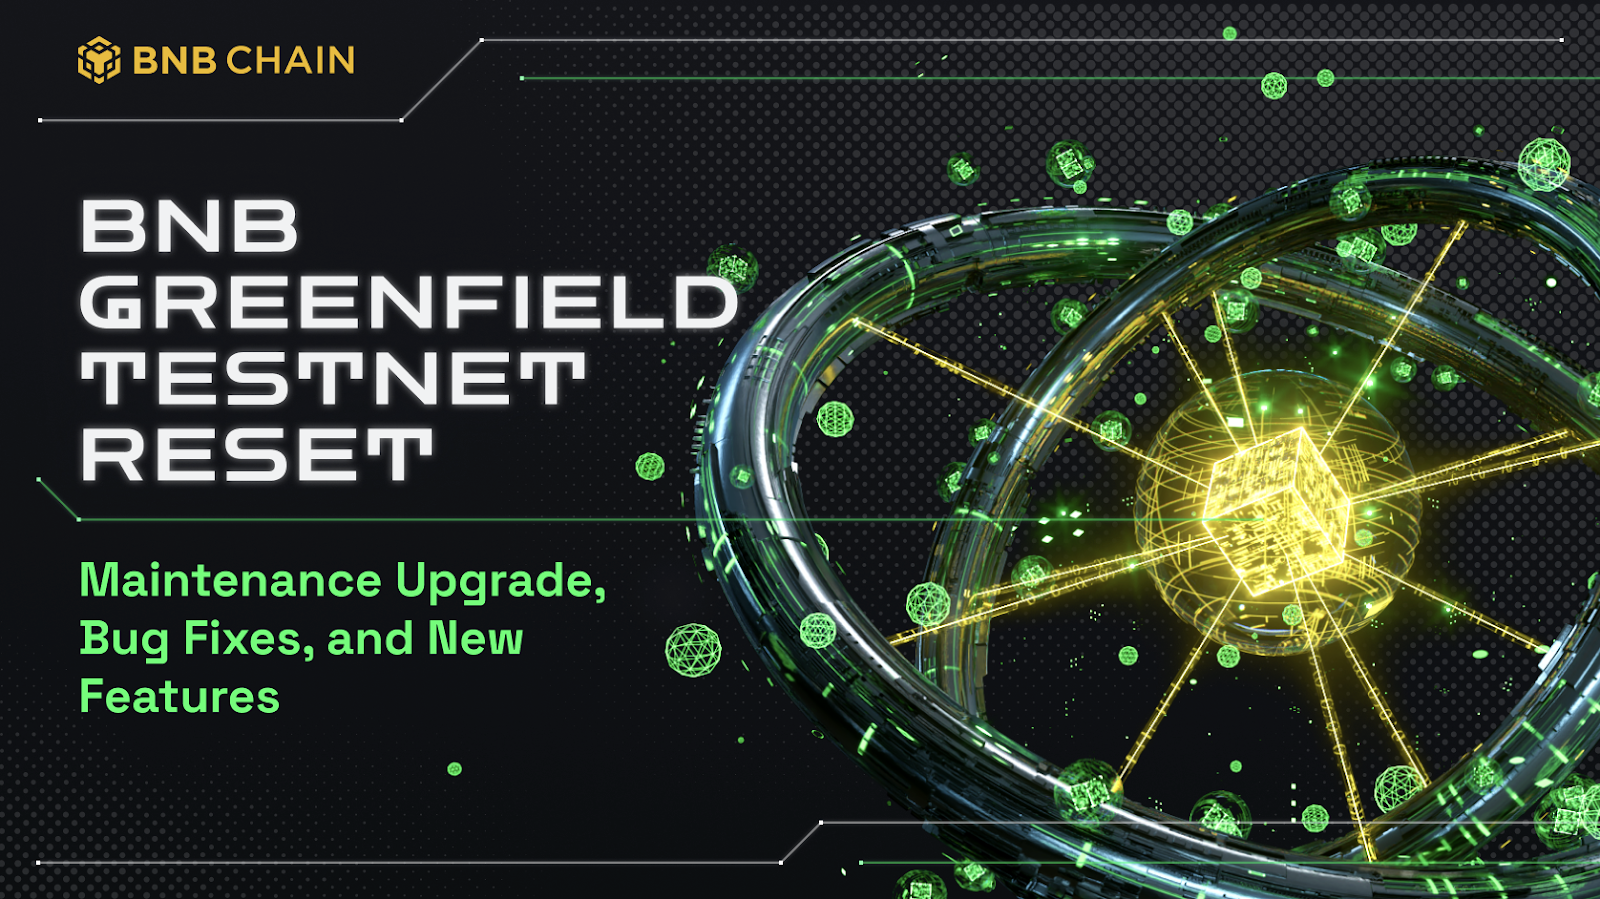 BNB Greenfield Testnet June Reset: Maintenance Upgrade, Bug Fixes, and New Features